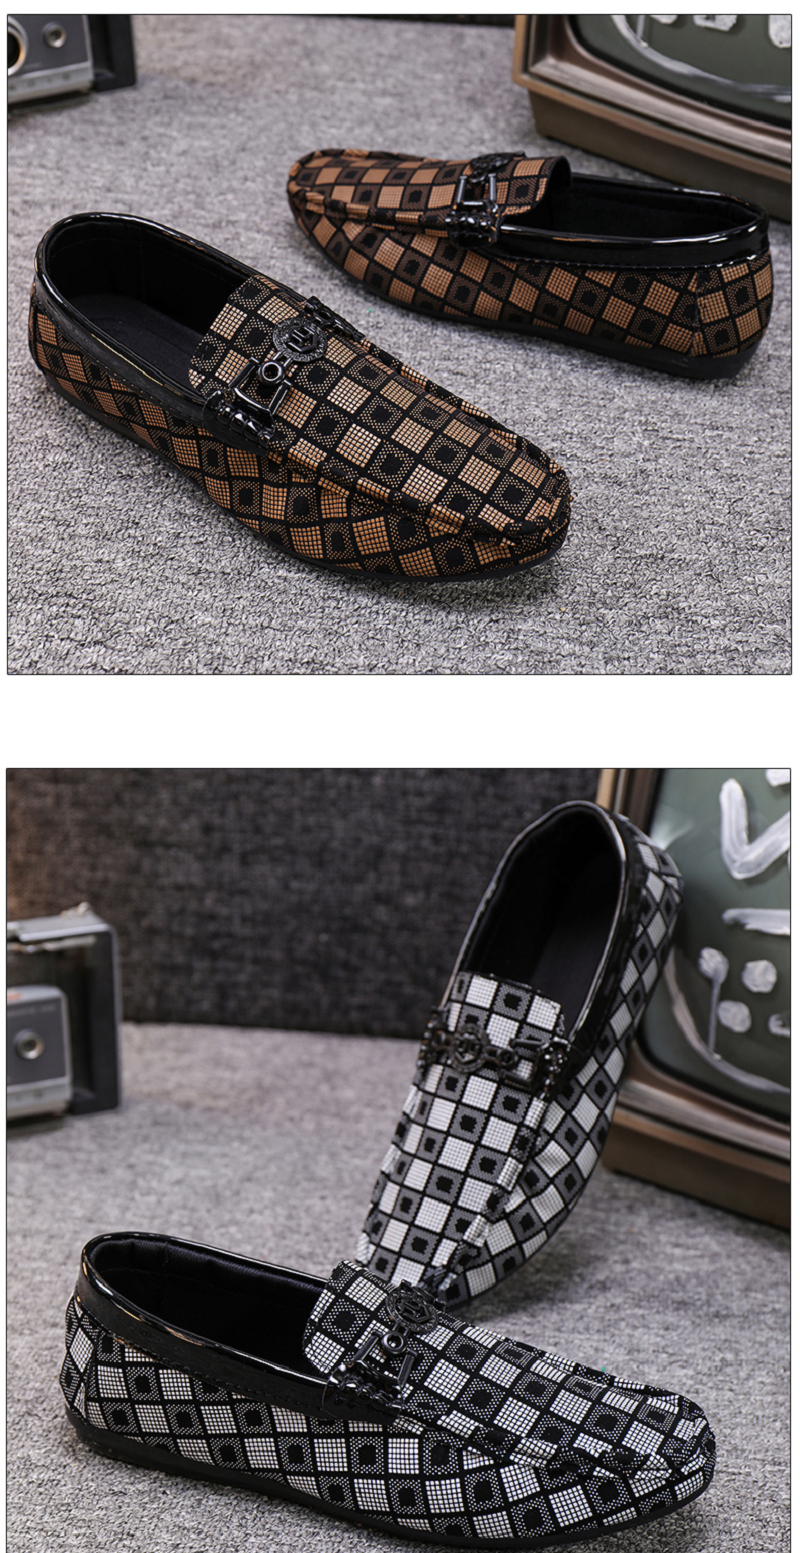 Will Loafer Shoes